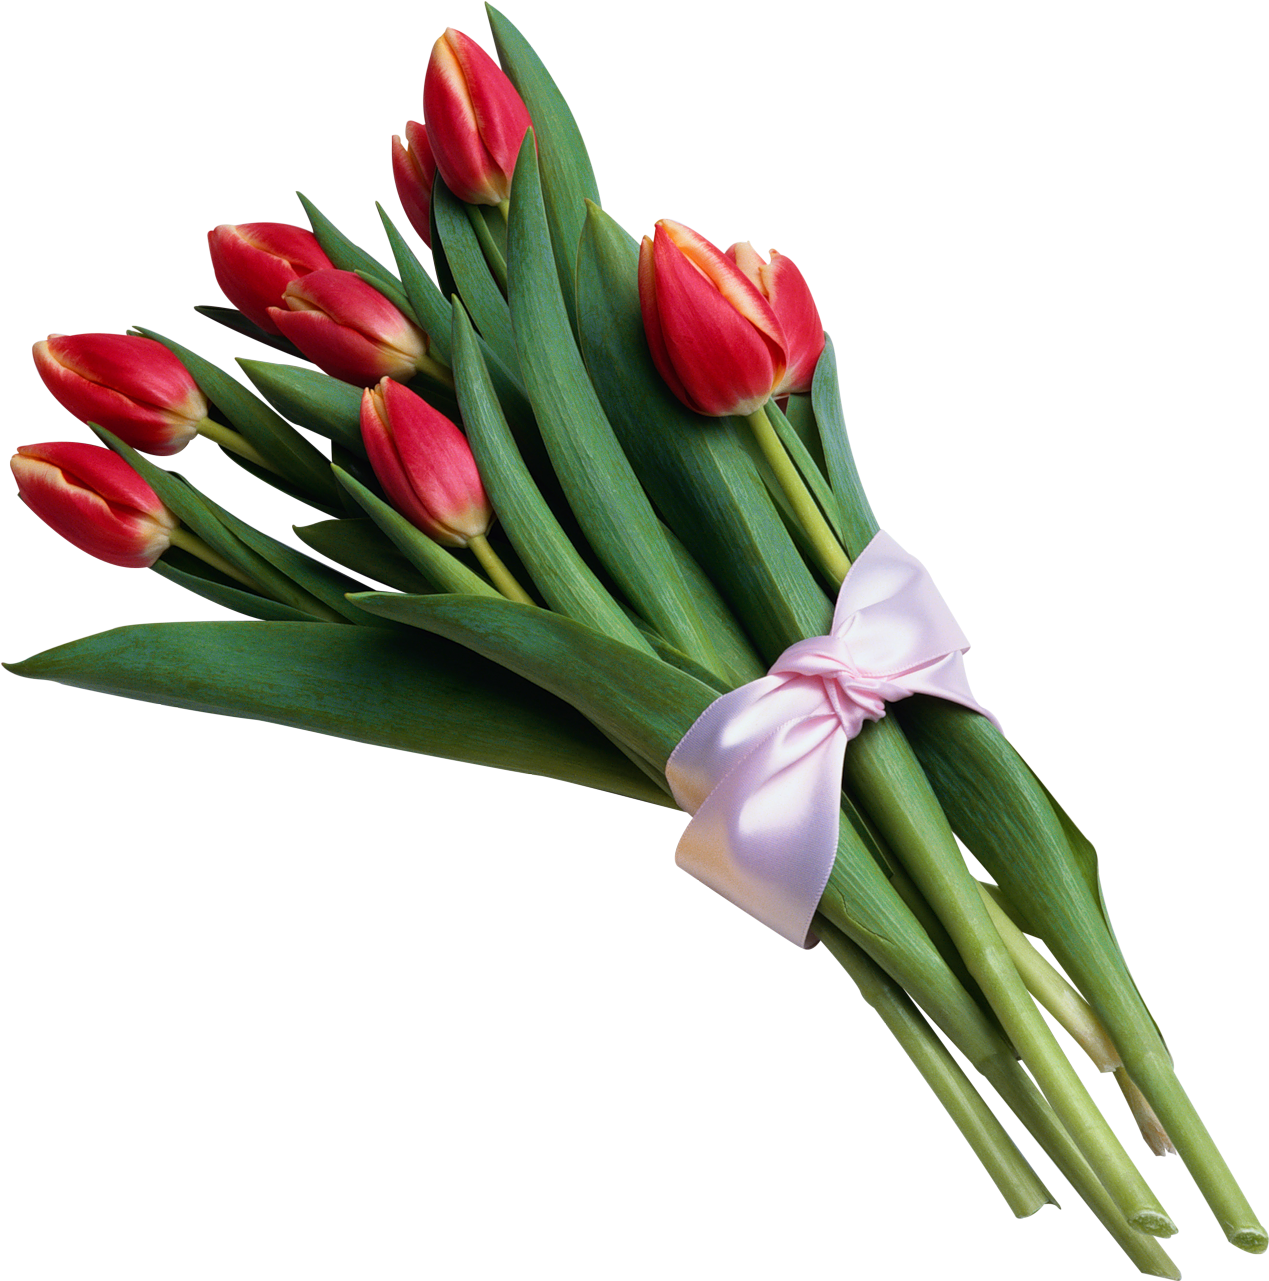 A Bouquet Of Red Tulips Tied With A Pink Ribbon